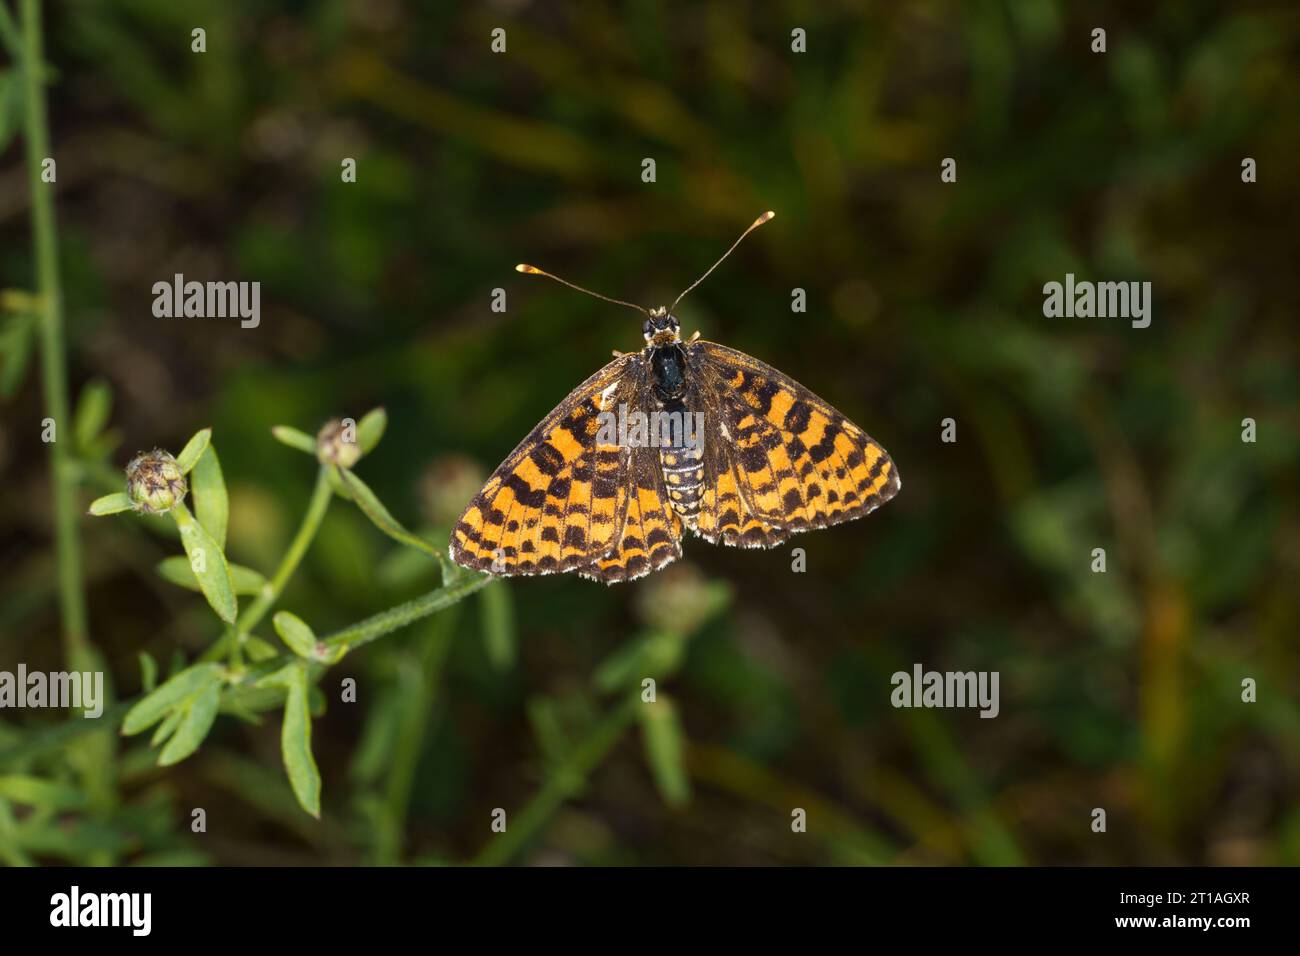 Melitaea didyma Family Nymphalidae Genus Melitaea Spotted fritillary Red-band fritillary butterfly wild nature insect photography, picture, wallpaper Stock Photo